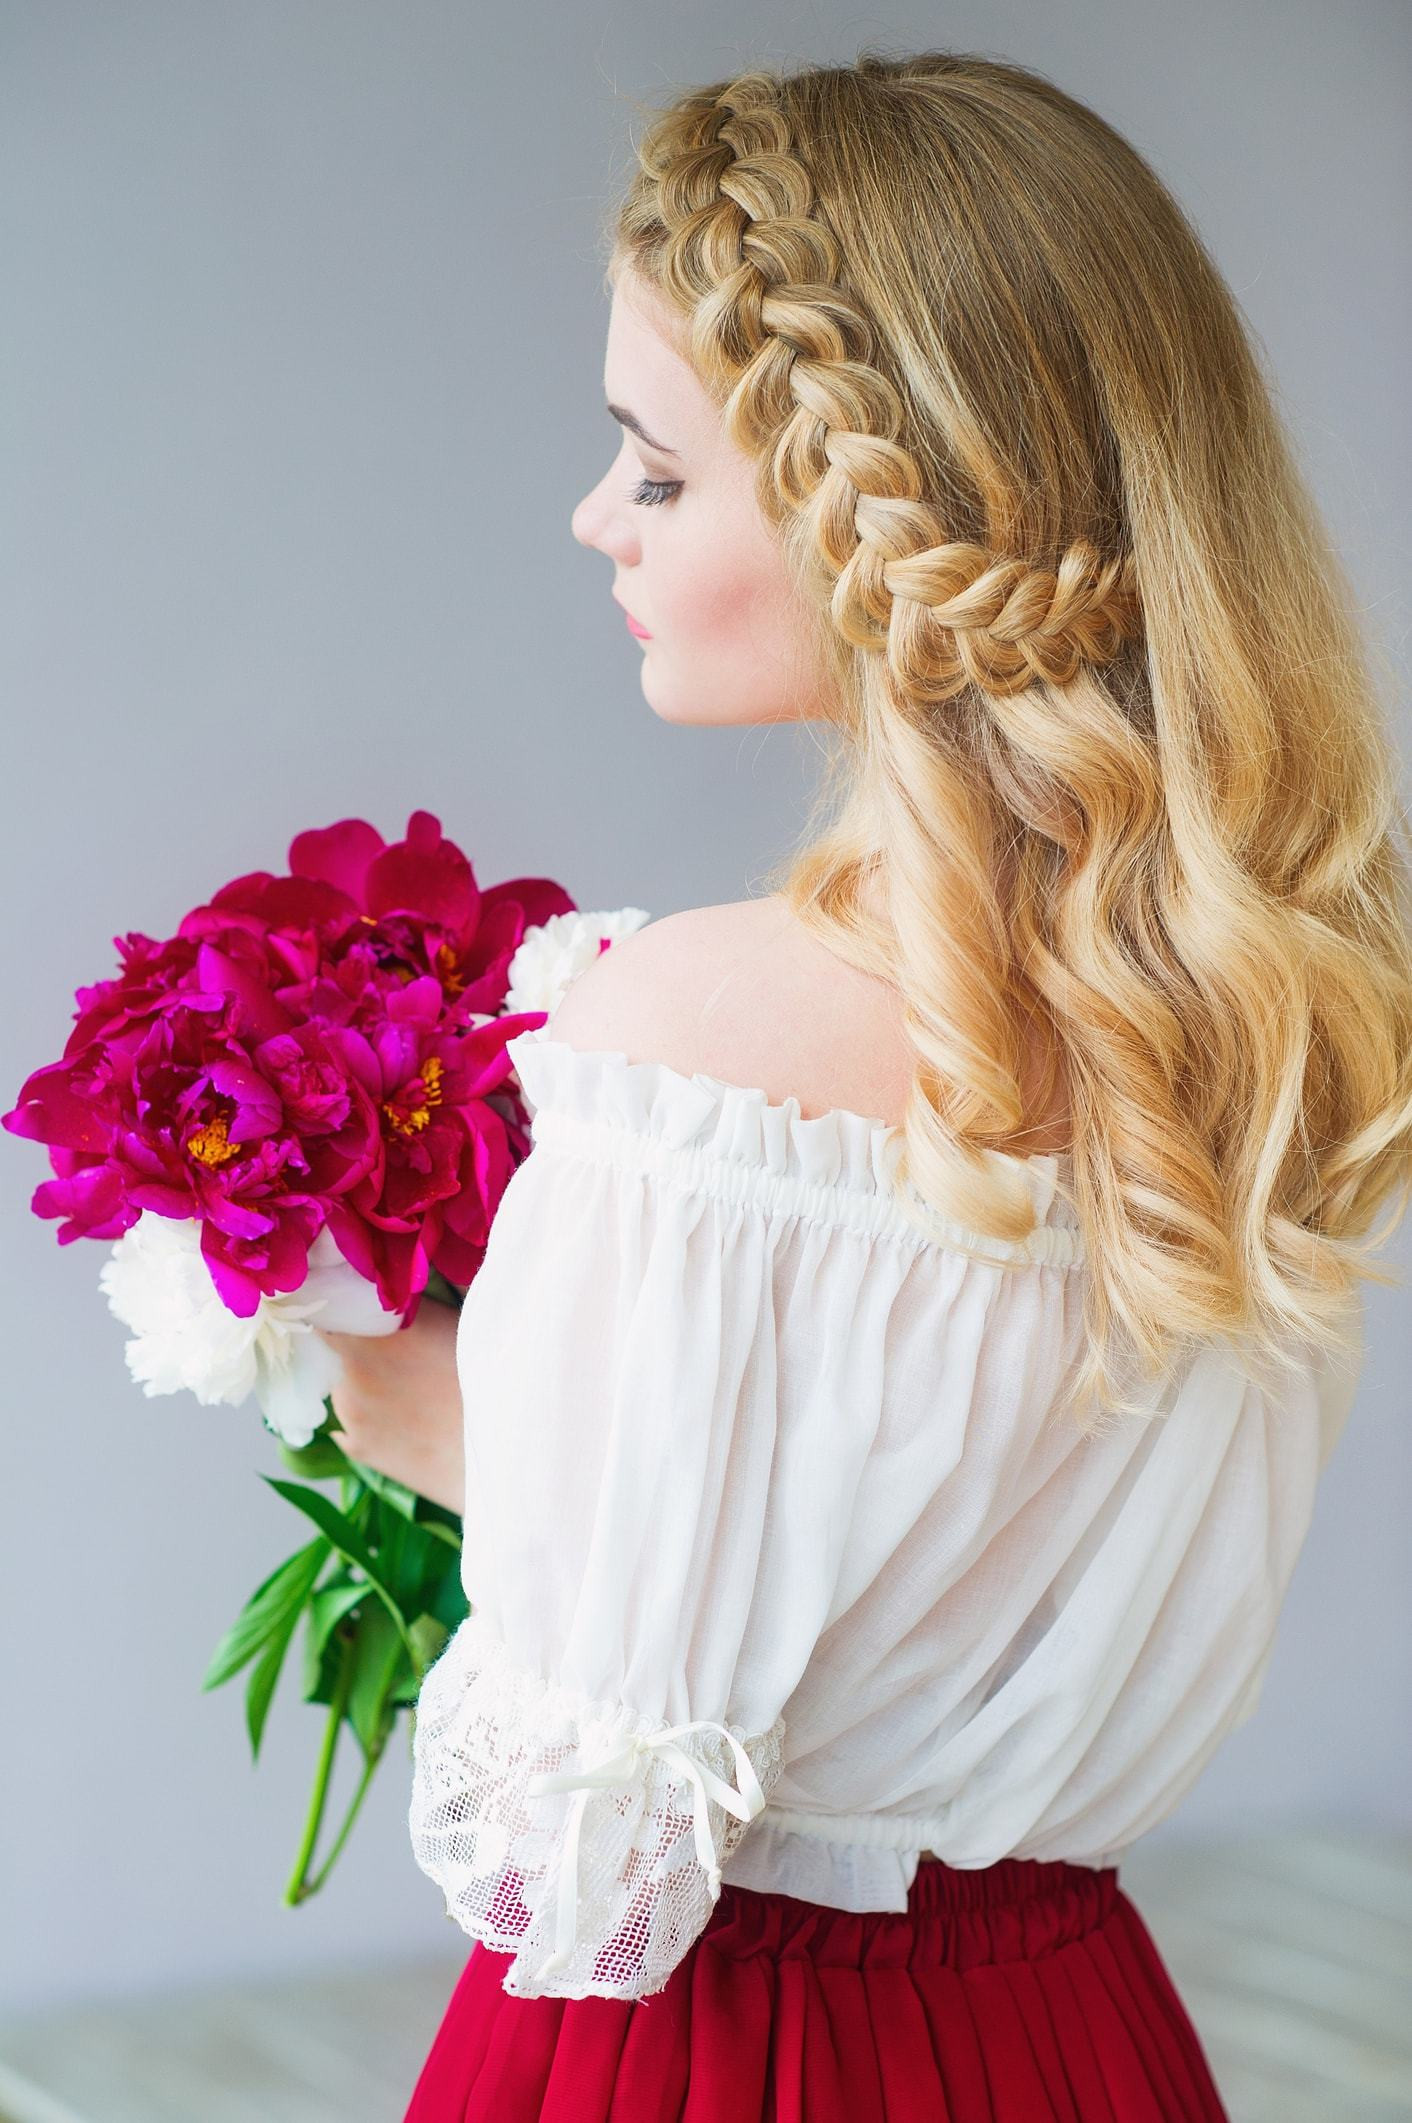 Wedding Flower Girl Hairstyles
 Flower Girl Hairstyles That Flatter Girls of All Ages